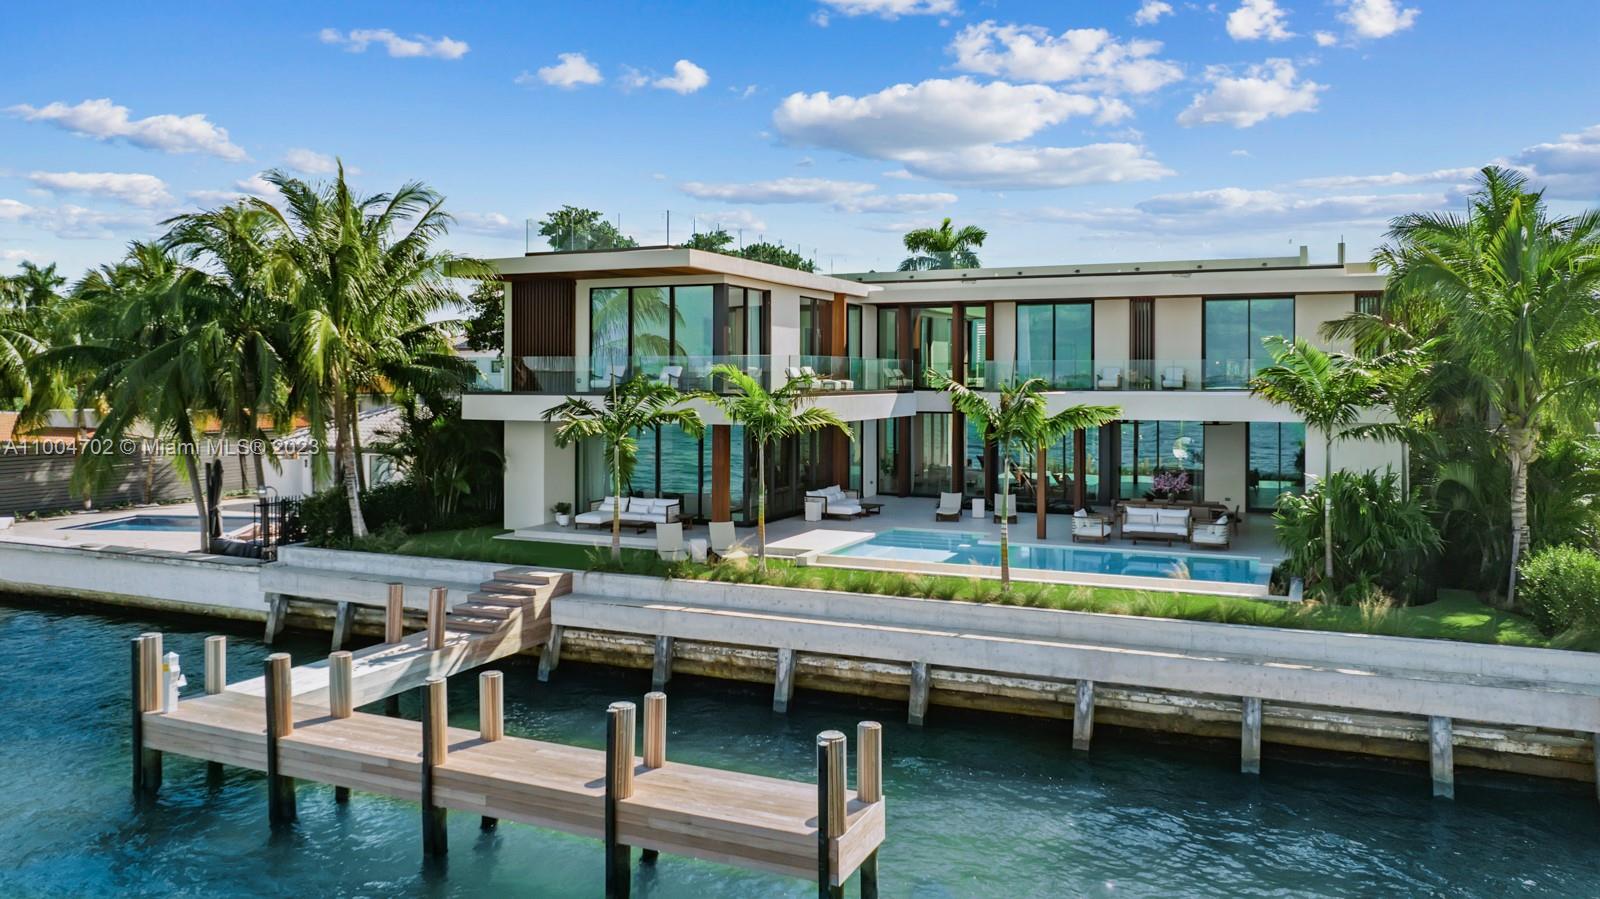 Stunning new construction modern waterfront home situated on oversized 15,000 SQ FT with over 100 feet of waterfront. Enjoy wide bay views of mesmerizing sunsets, sea breezes, and the beautiful Miami Edgewater skyline! Located on the coveted Venetian Islands, this stunning 7 Bed / 8 Bath home was designed by Max Strang. Amenities include theatre, den, spacious outdoor living space with covered cabana, large roof terrace with 360-degree views of Miami, and more! Perfectly situated between Downtown Miami and Miami Beach, high-end restaurants, and shopping.